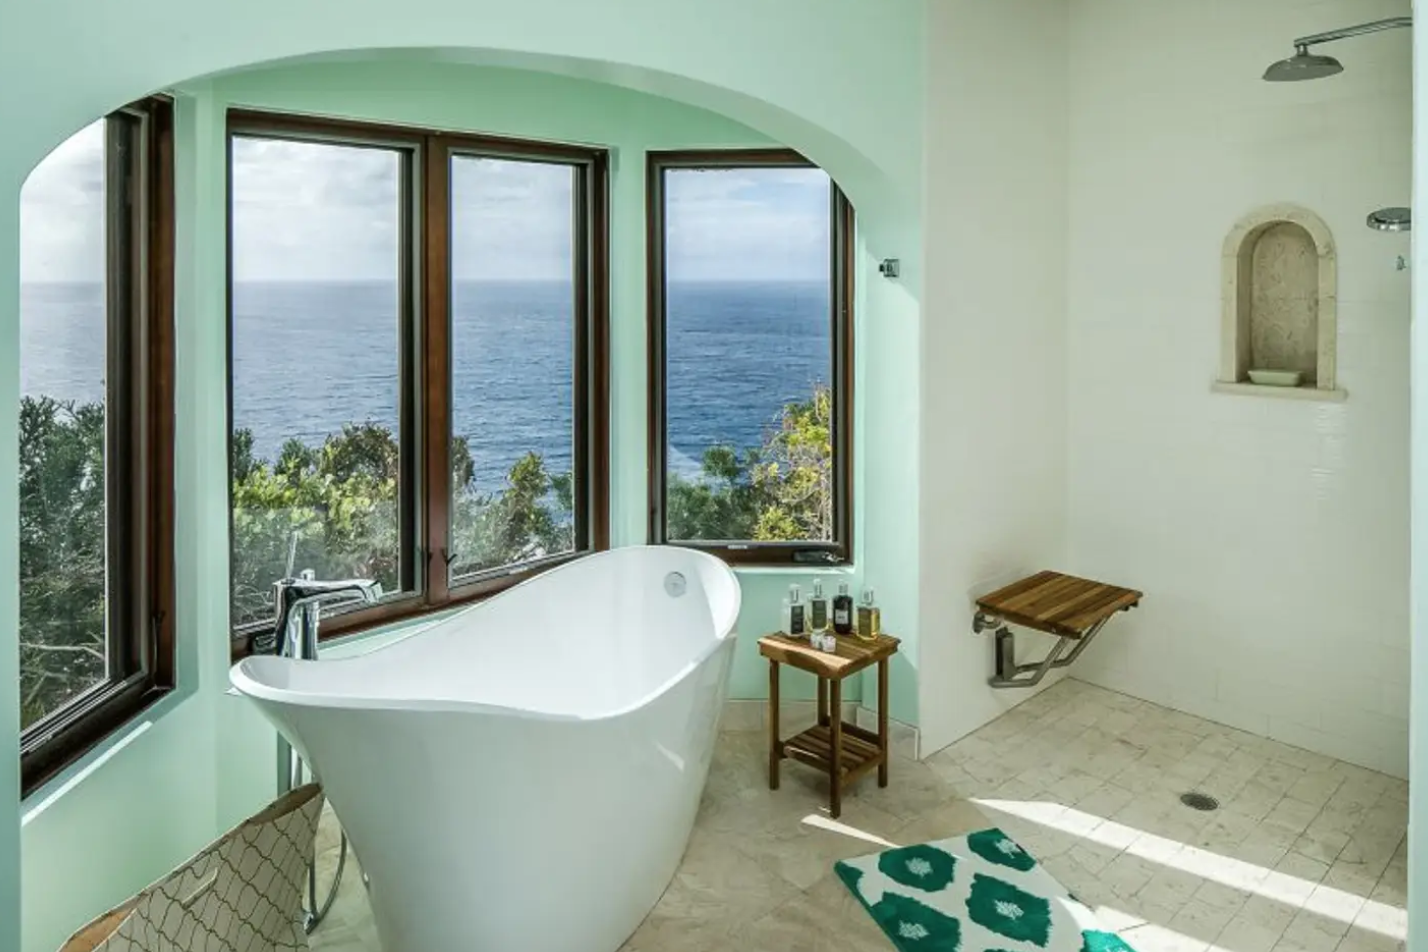 A Bathroom in "Finisterre" - a two-acre, three-building complex on St. John